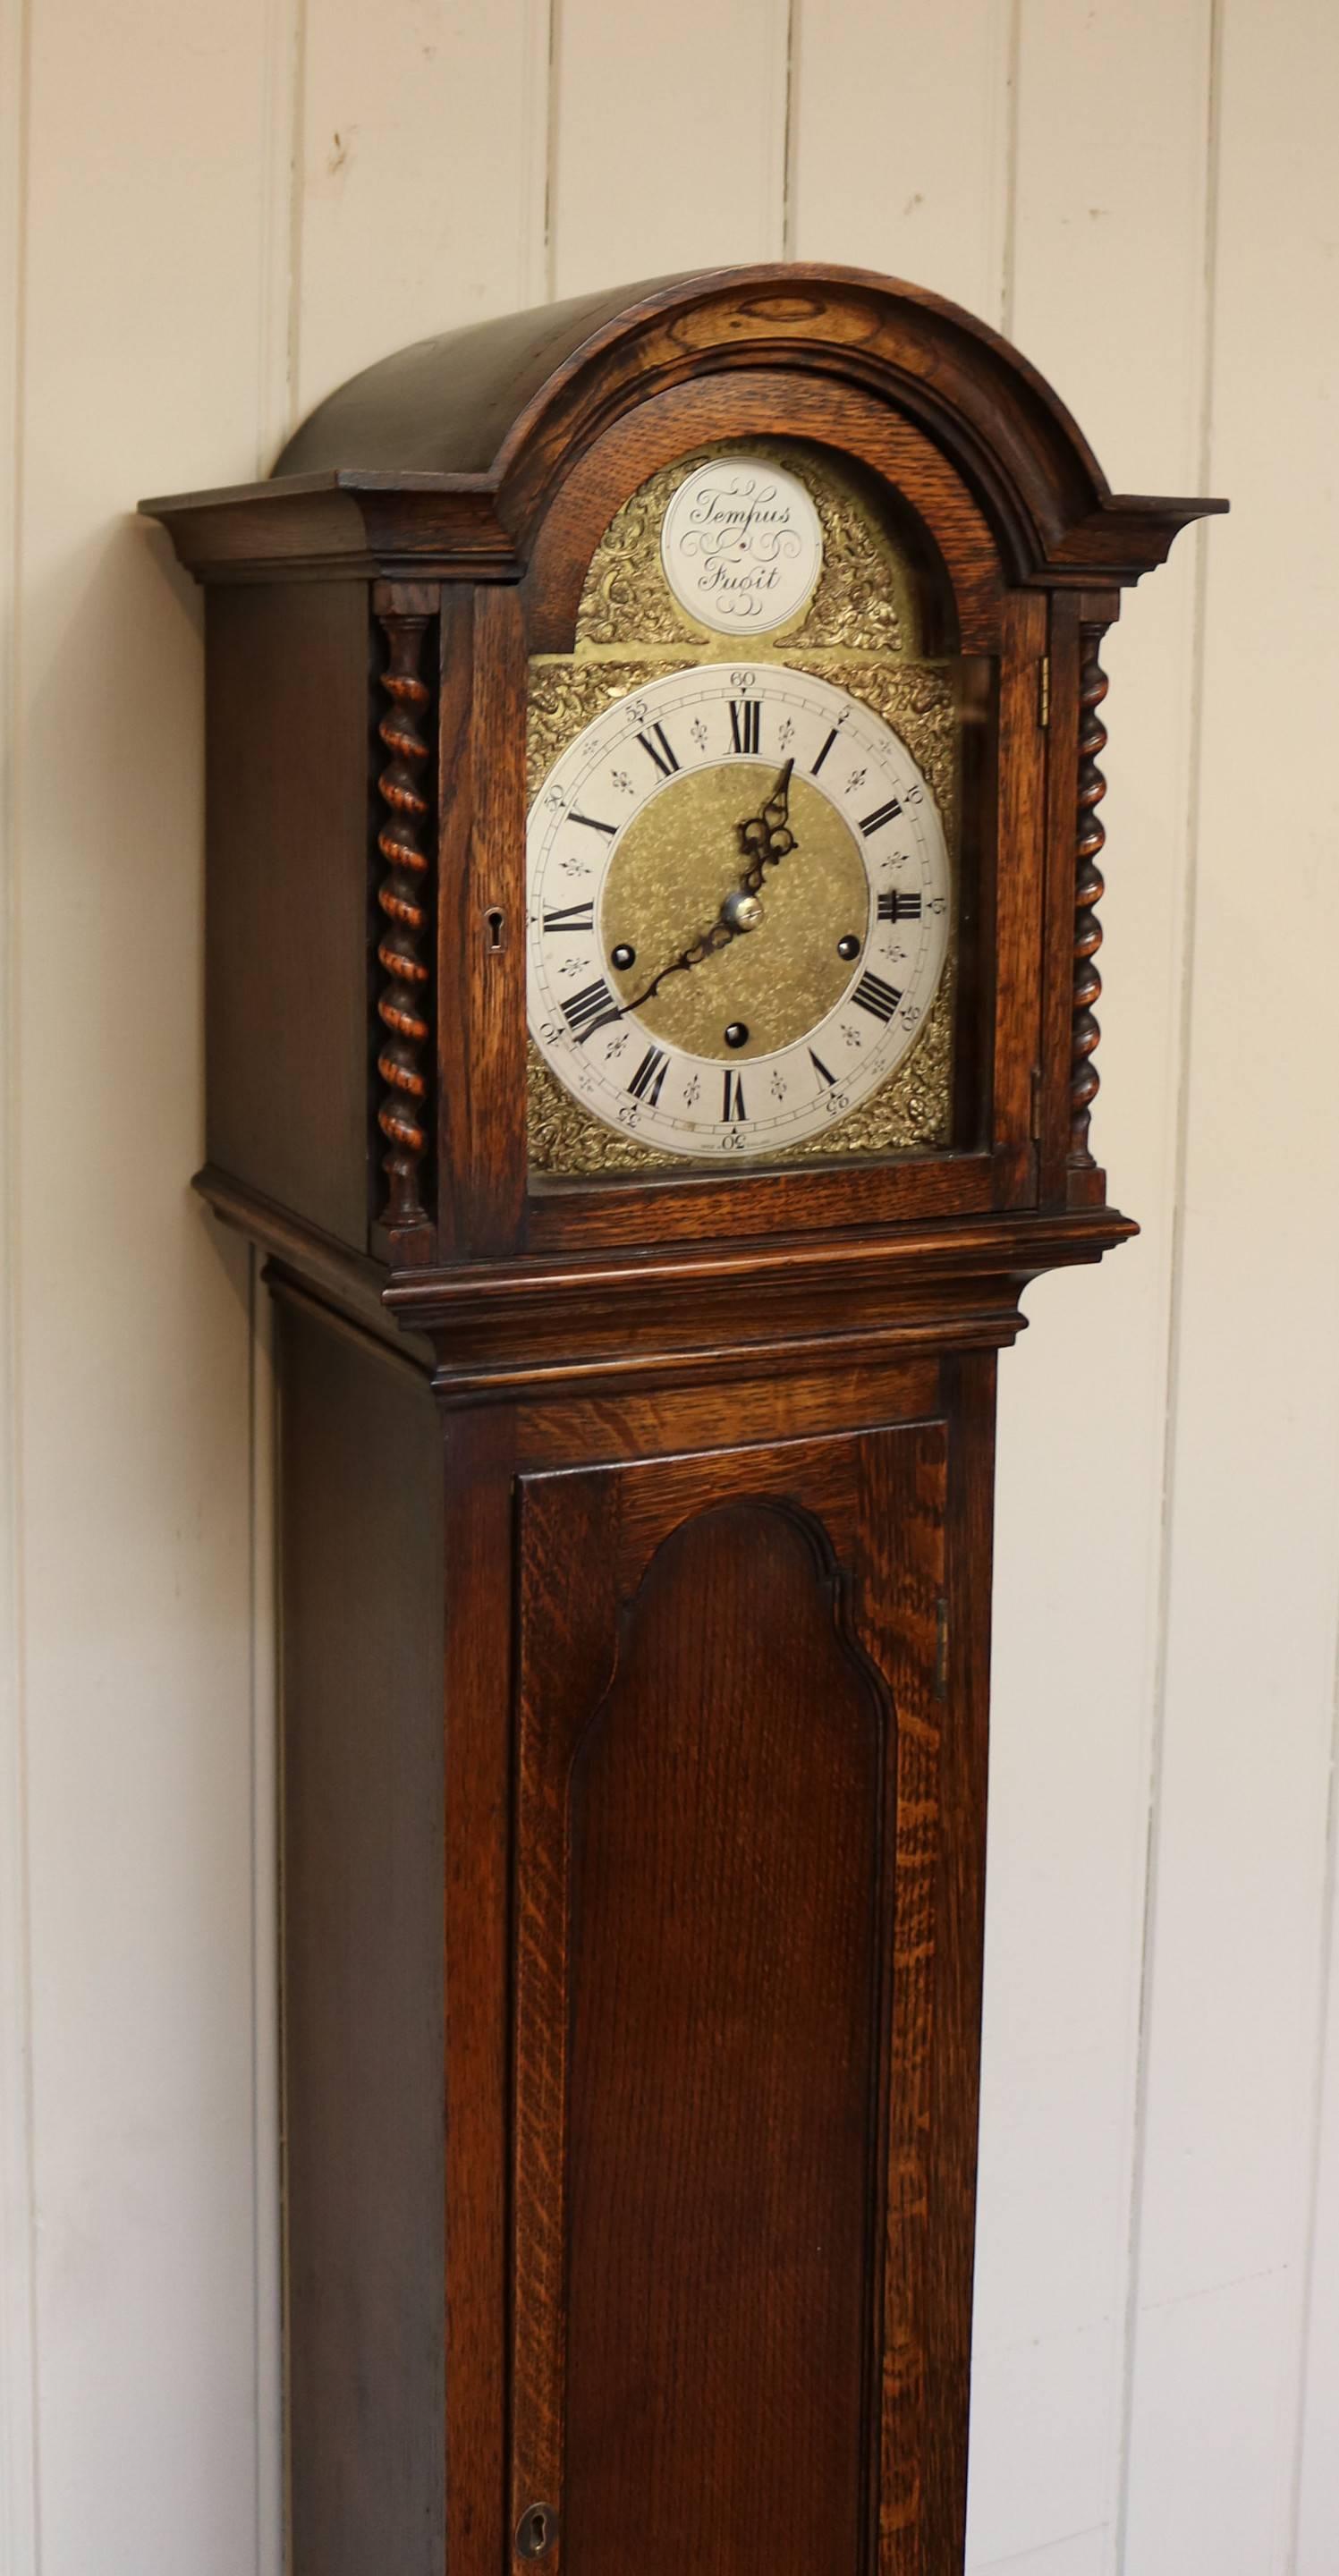 An English made solid oak Grandmother clock, (miniature longcase clock,) dating to the beginning of the 20th century. In the Jacobean style, it has a break arch hood with barley twist columns and a paneled long trunk door and base. The brass dial